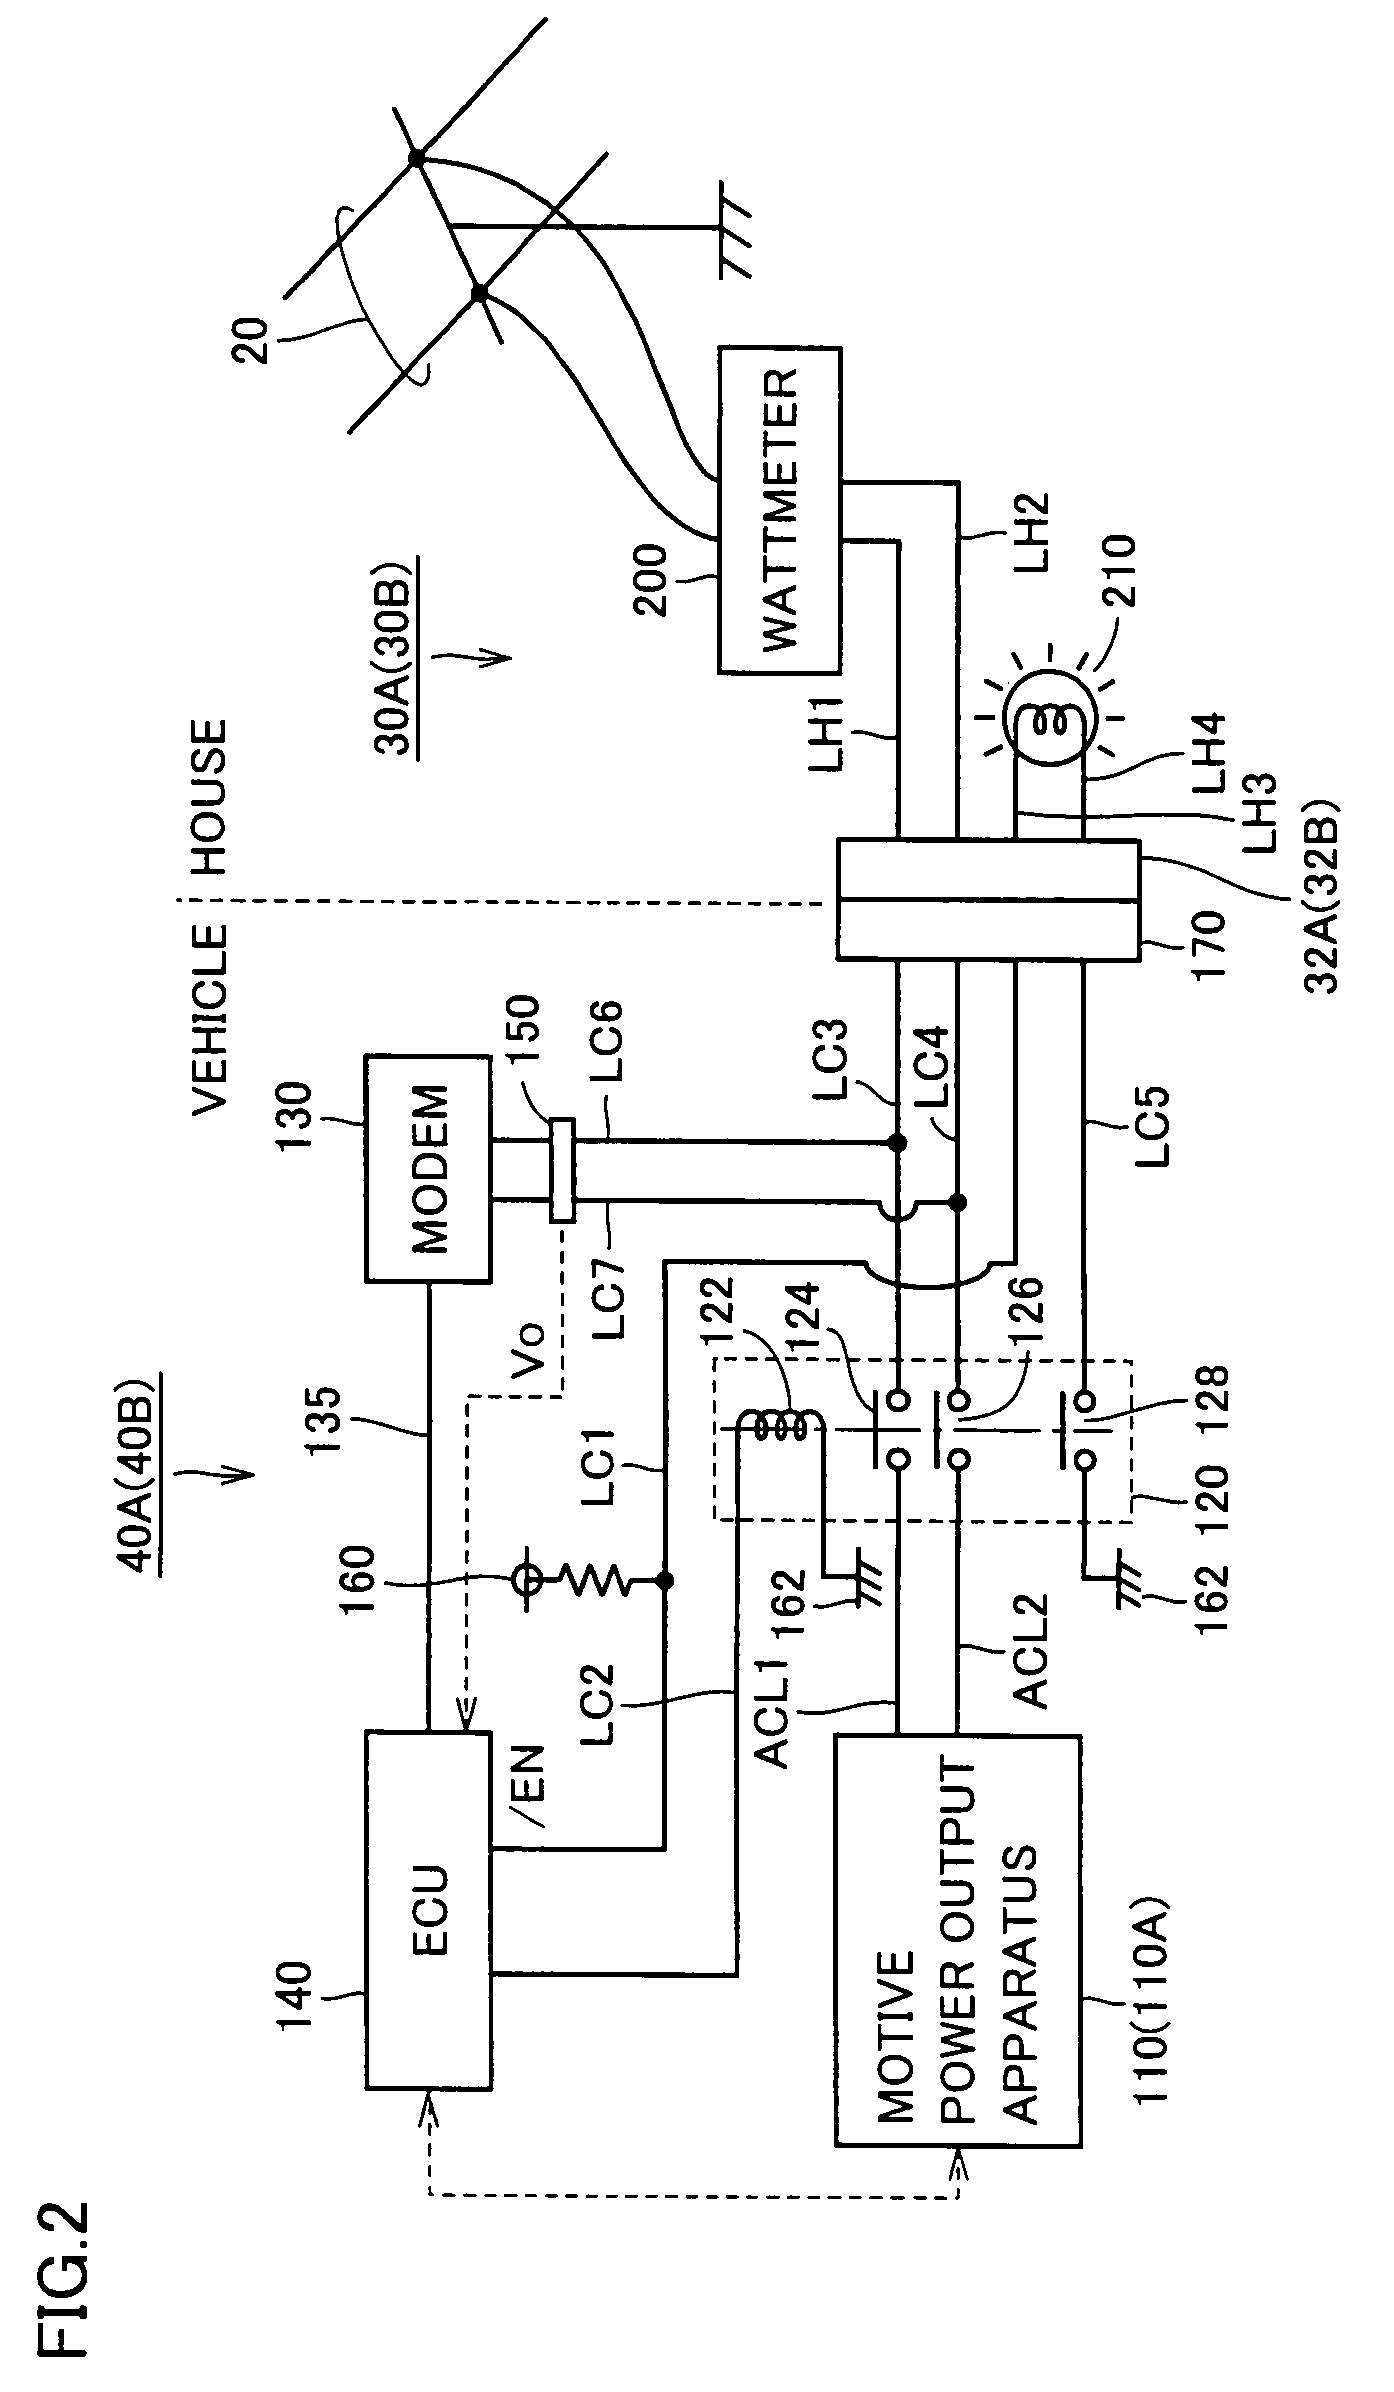 Electric power supply system